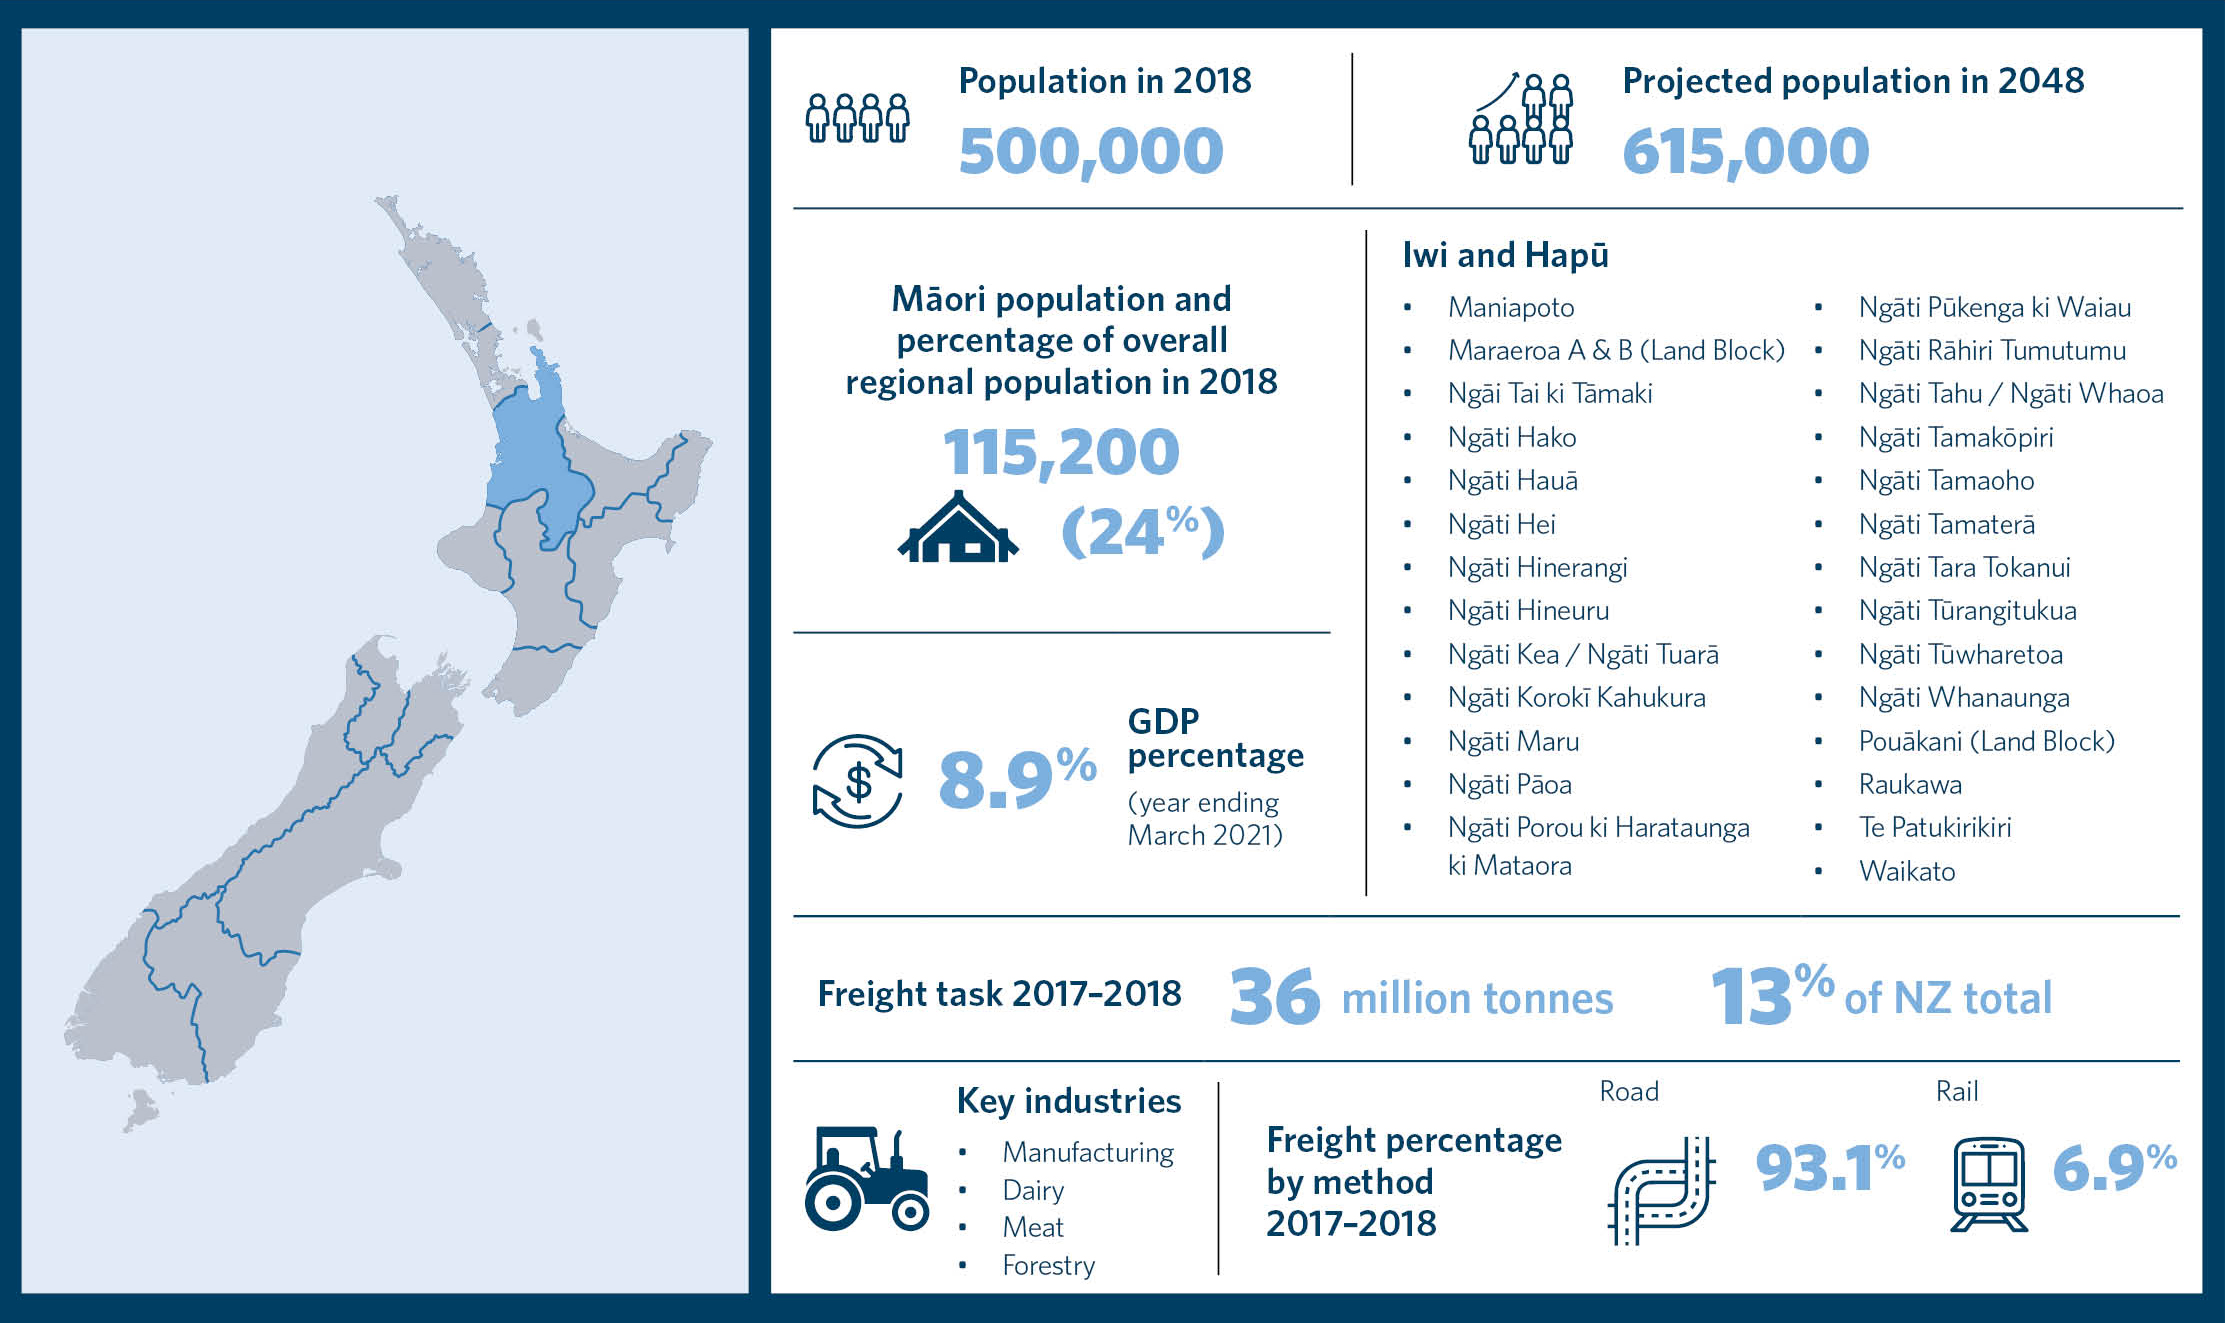 This is an infographic showing statistics for the region of Waikato. It includes information about the population in 2018, projected population in 2048, Māori population and percentage of overall regional population in 2018, a list of iwi and hapu, GDP pe